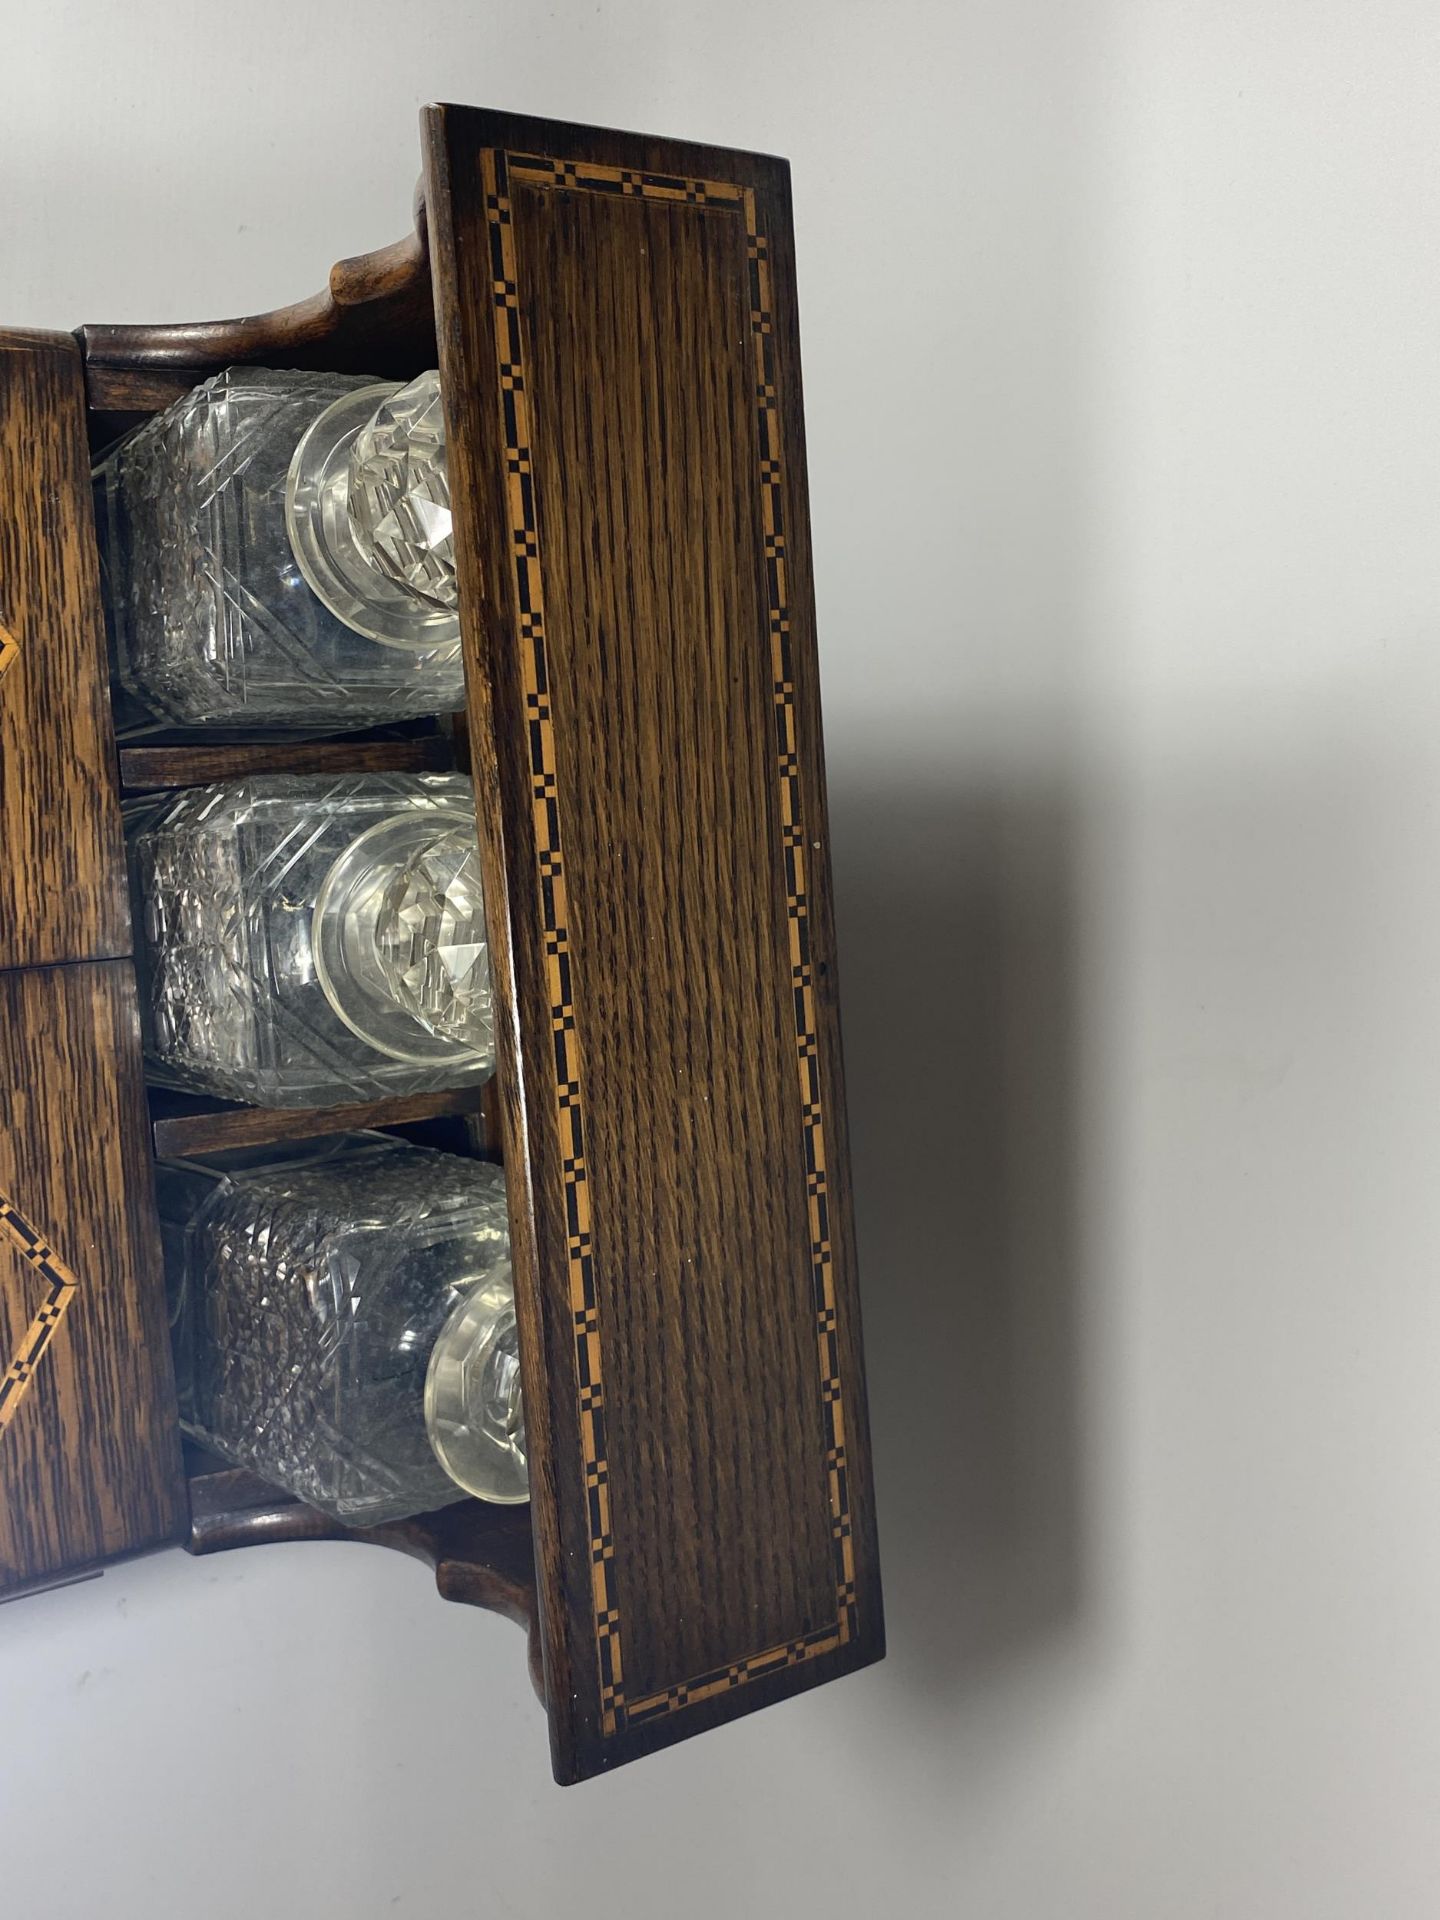 AN EDWARDIAN INLAID OAK THREE BOTTLE TANTALUS HOLDER WITH TWIN LIDDED COMPARTMENT AND LOWER DRAWER - Image 6 of 6